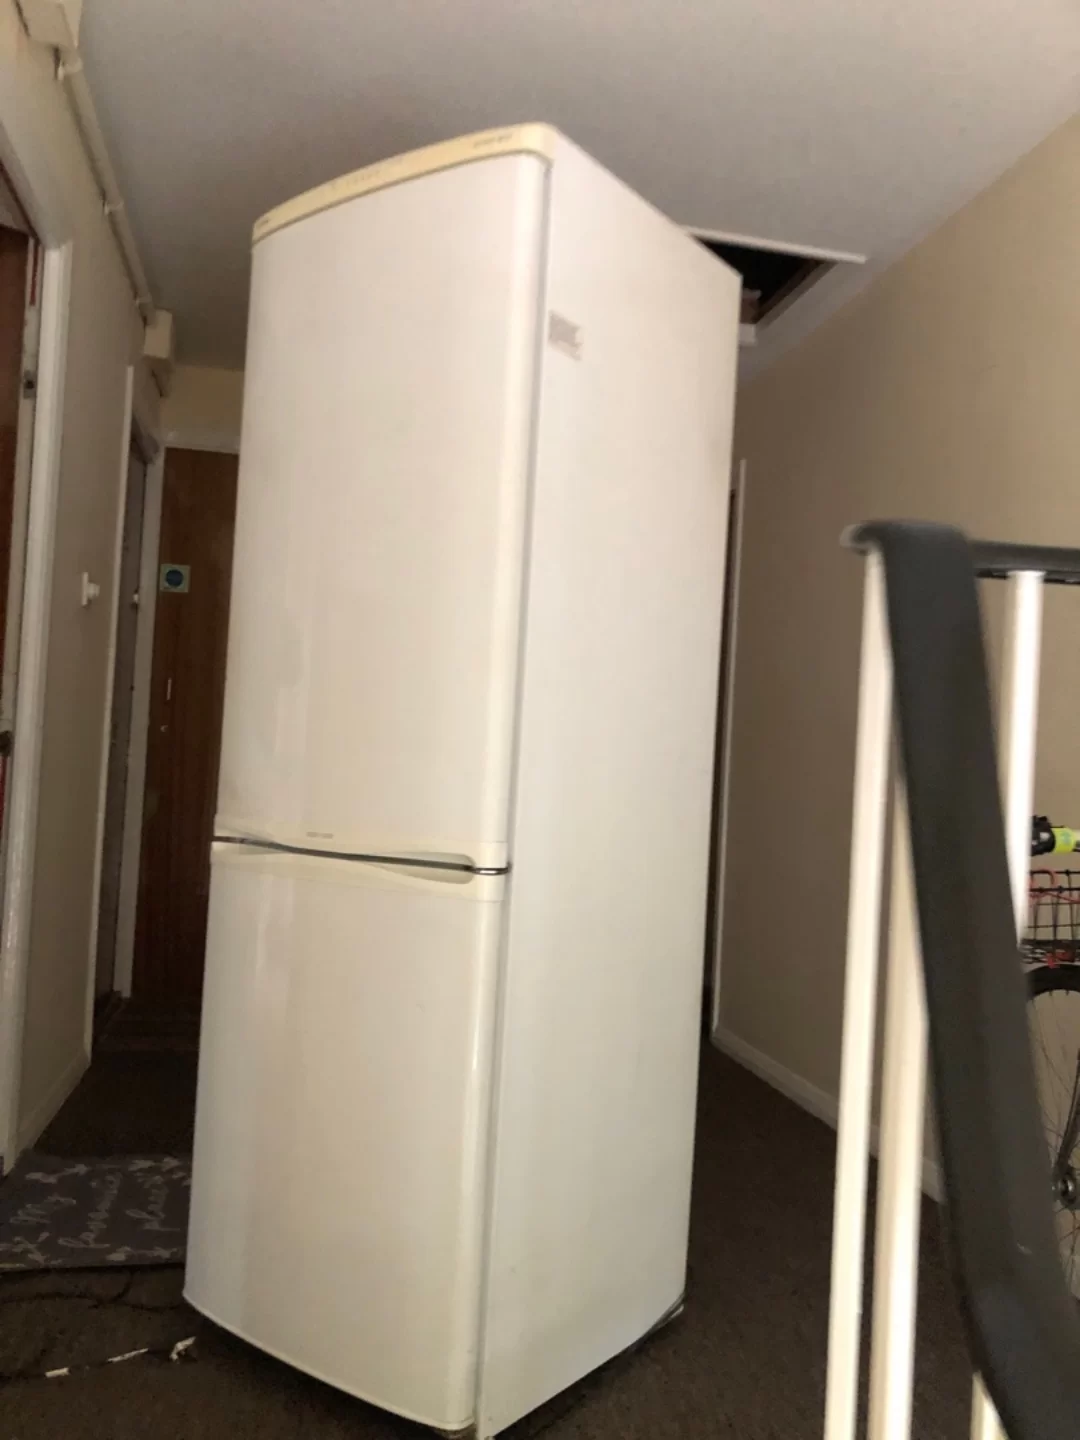 fridge collected for £45